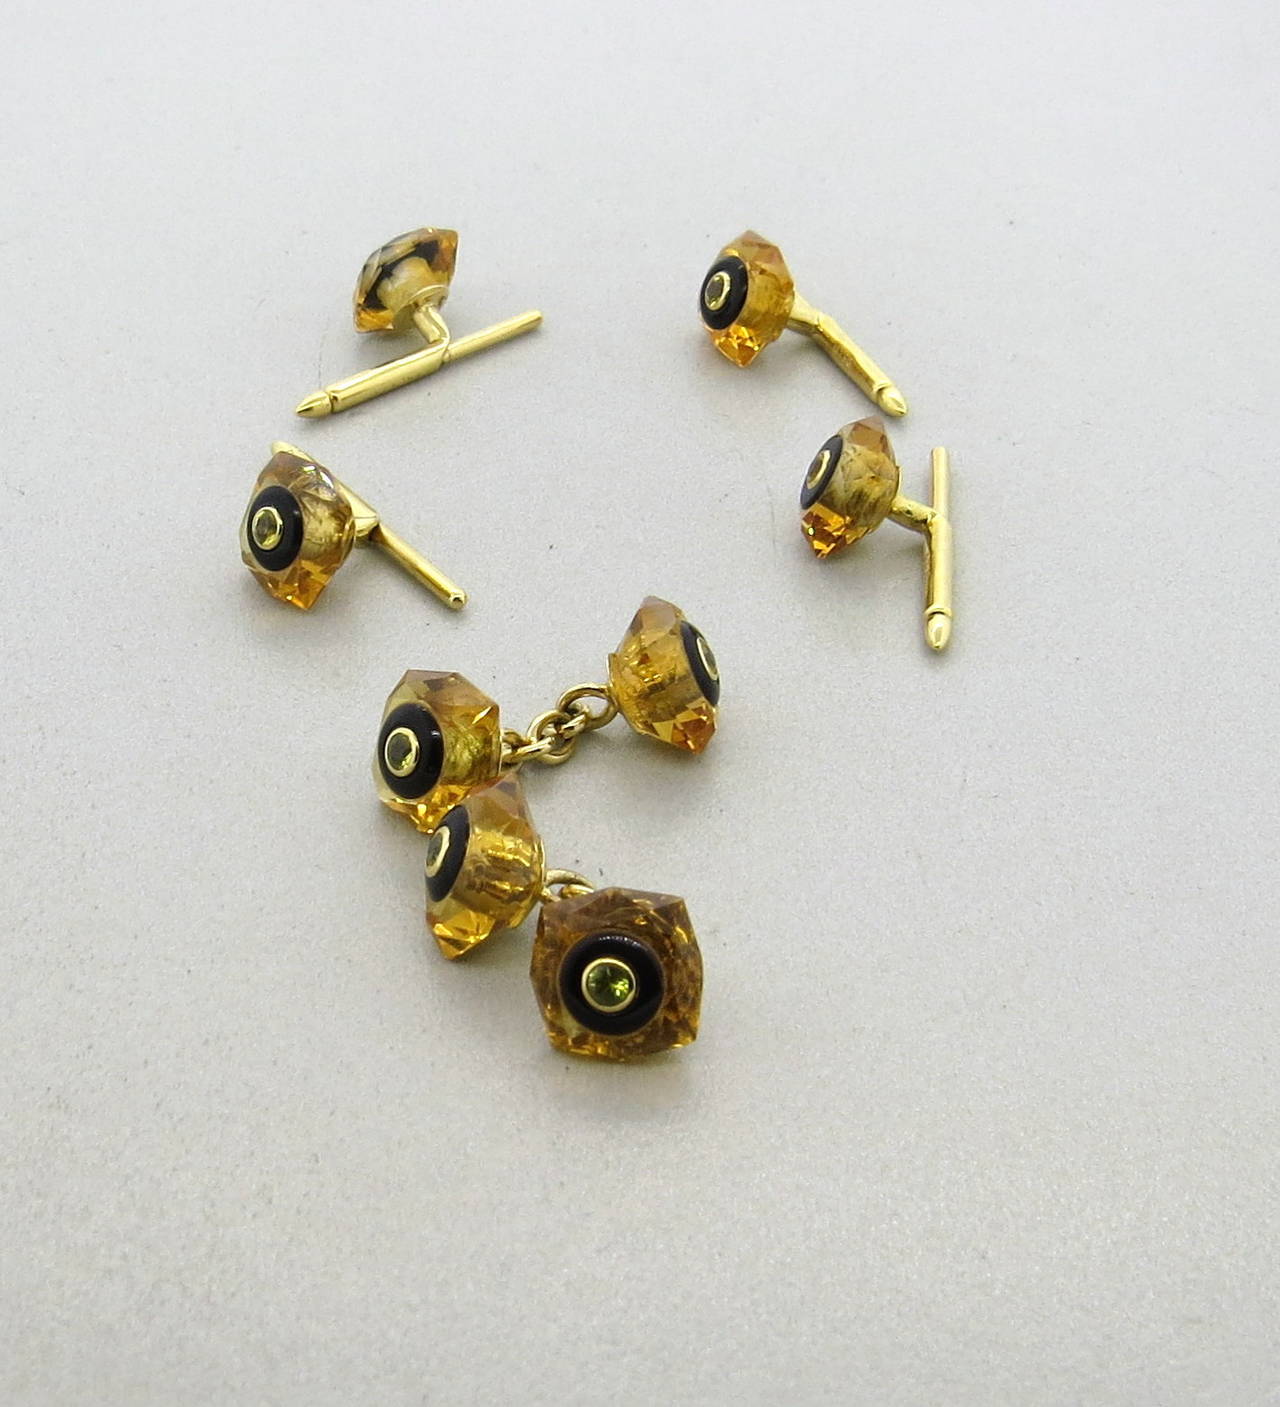 An 18k yellow gold set of cufflinks and studs crafted from amber, onyx and citrine.  Crafted by Trianon, the cufflinks measure 11mm x 11mm and the studs measure 10mm x 10mm.  The weight of the set is 14.5 grams.  The pieces are marked with the